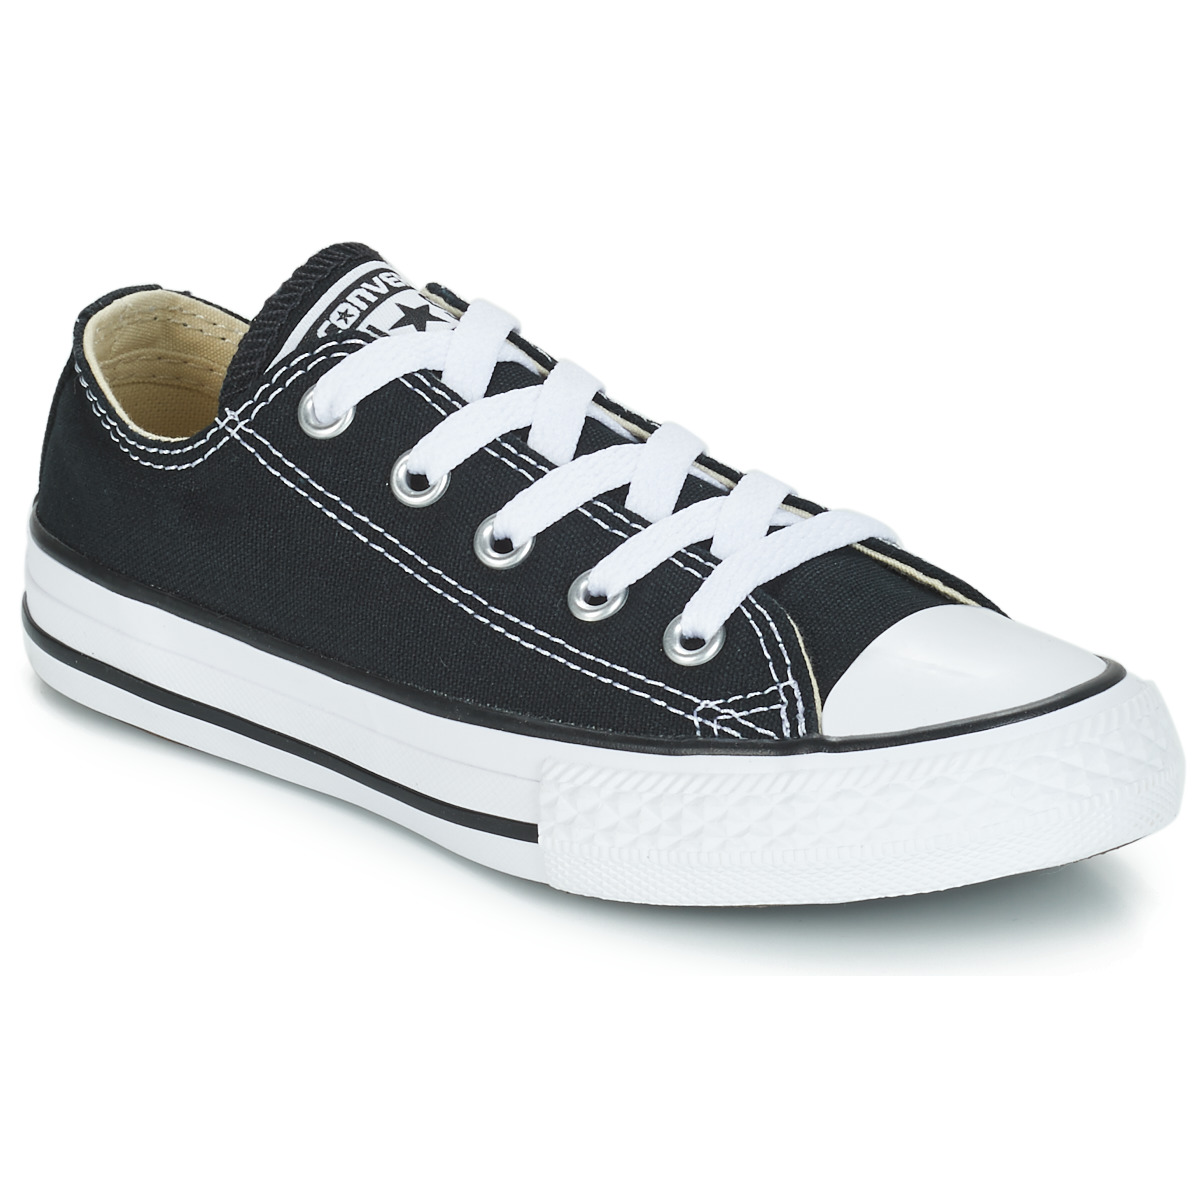 Shoes Children Hi top trainers Converse ALL STAR OX Black